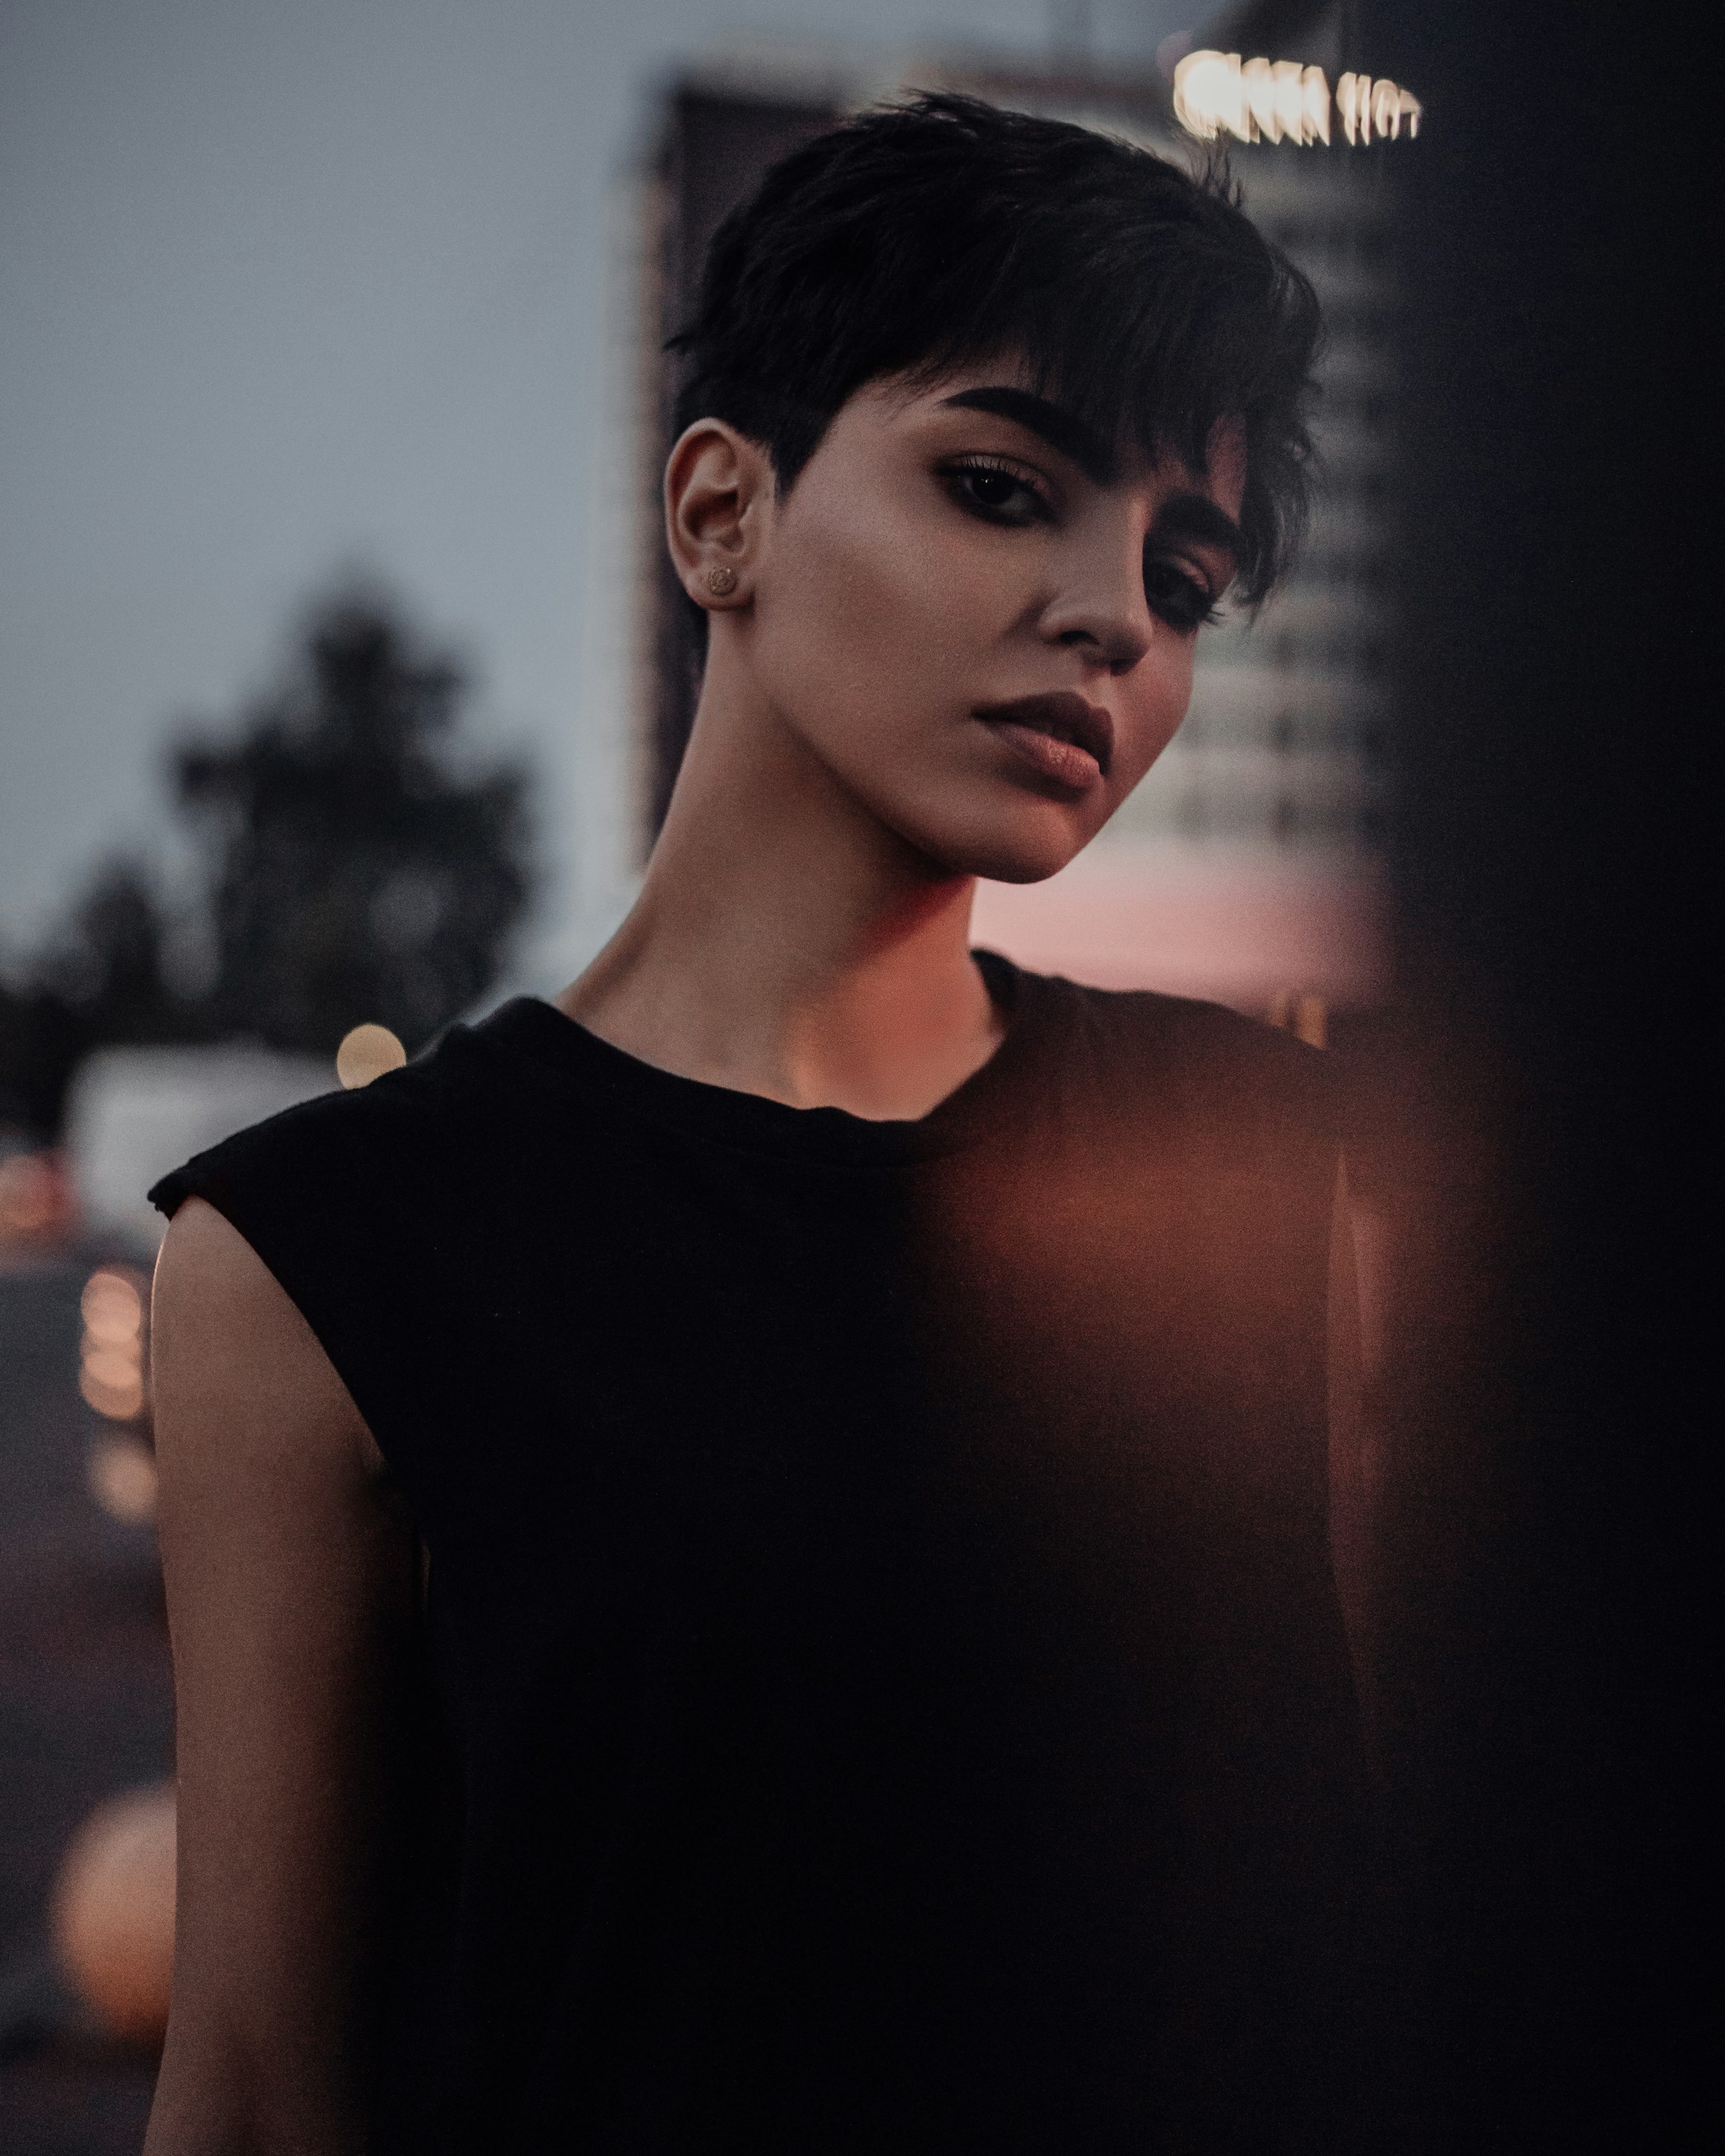 A woman with short hair | Source: Unsplash